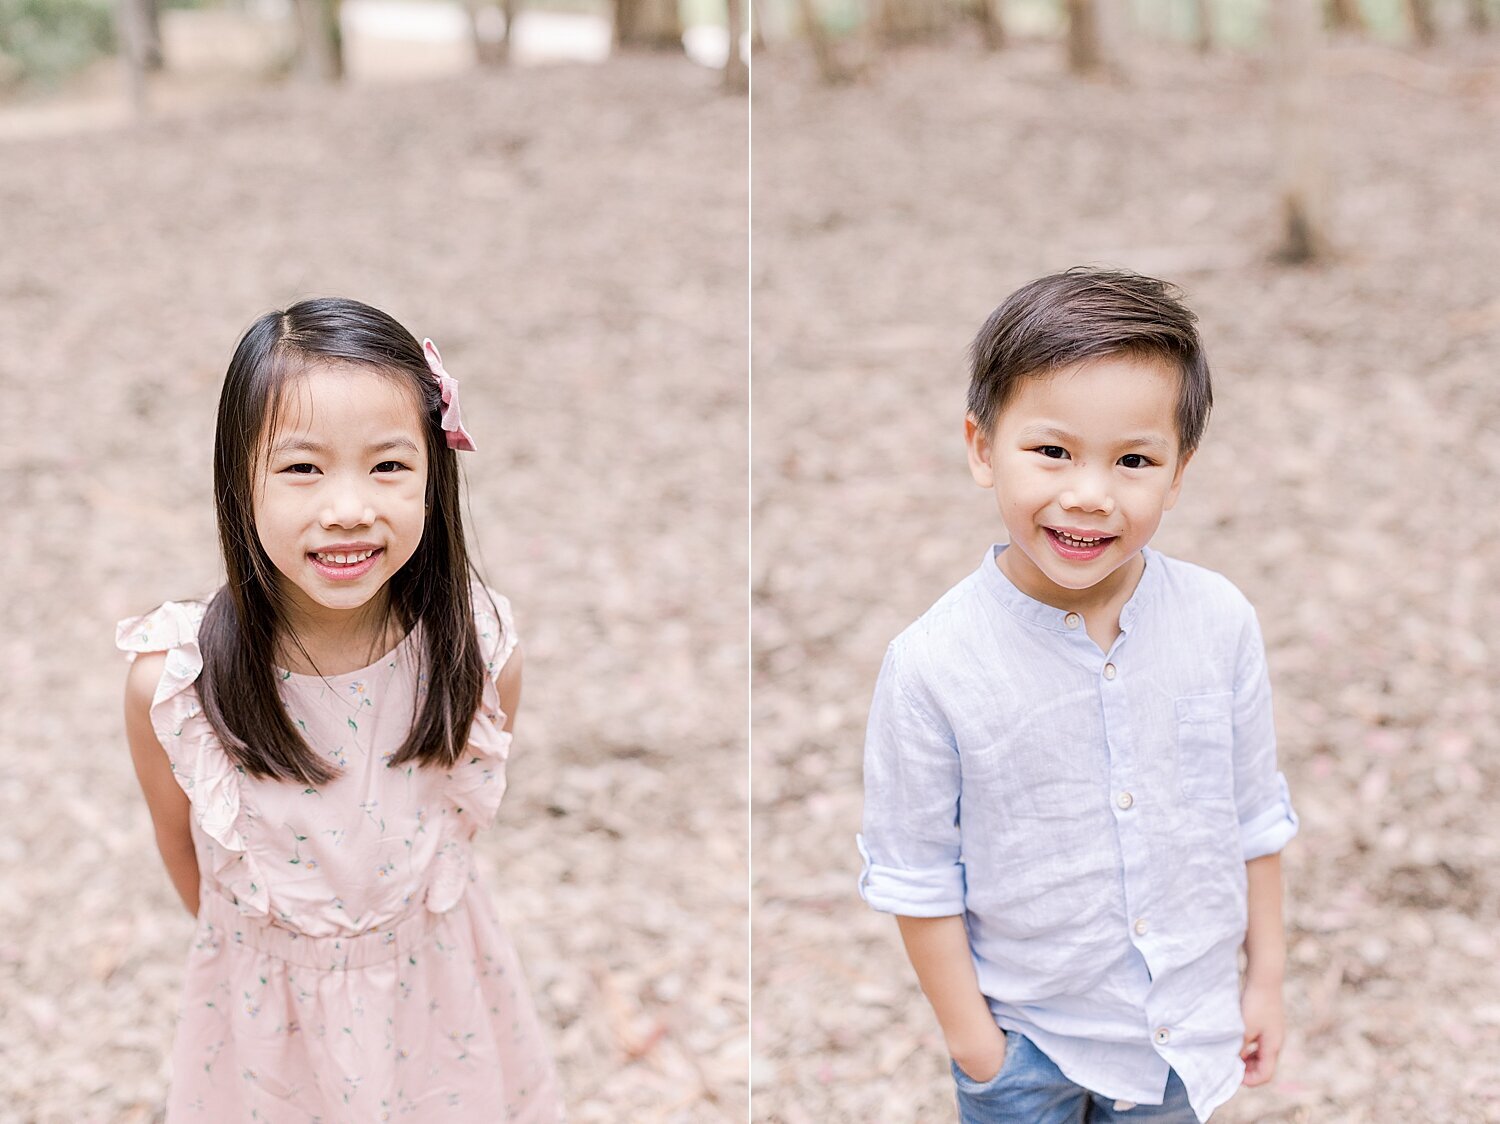 Children's portraits during family photos with Ambre Williams Photography.